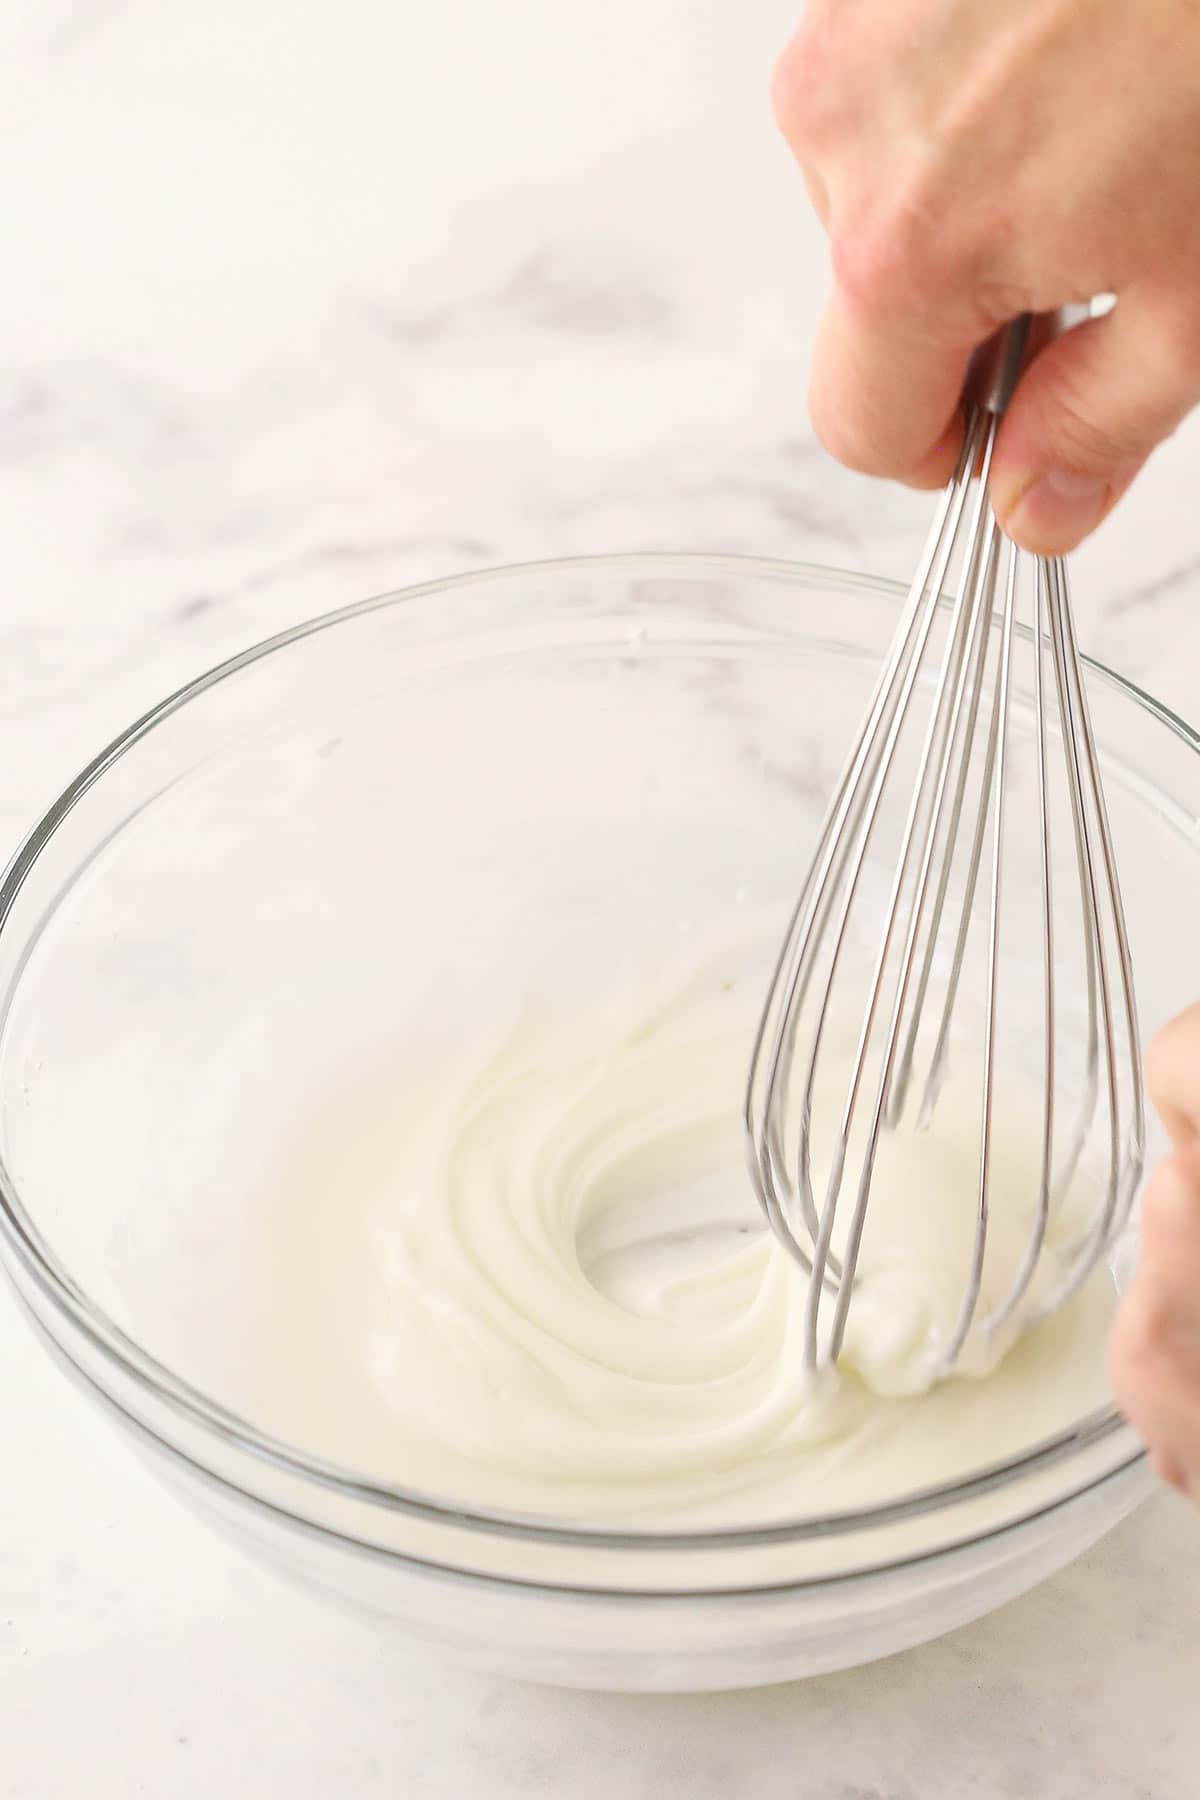 Homemade lemon icing-glaze being whisked in a small mixing bowl